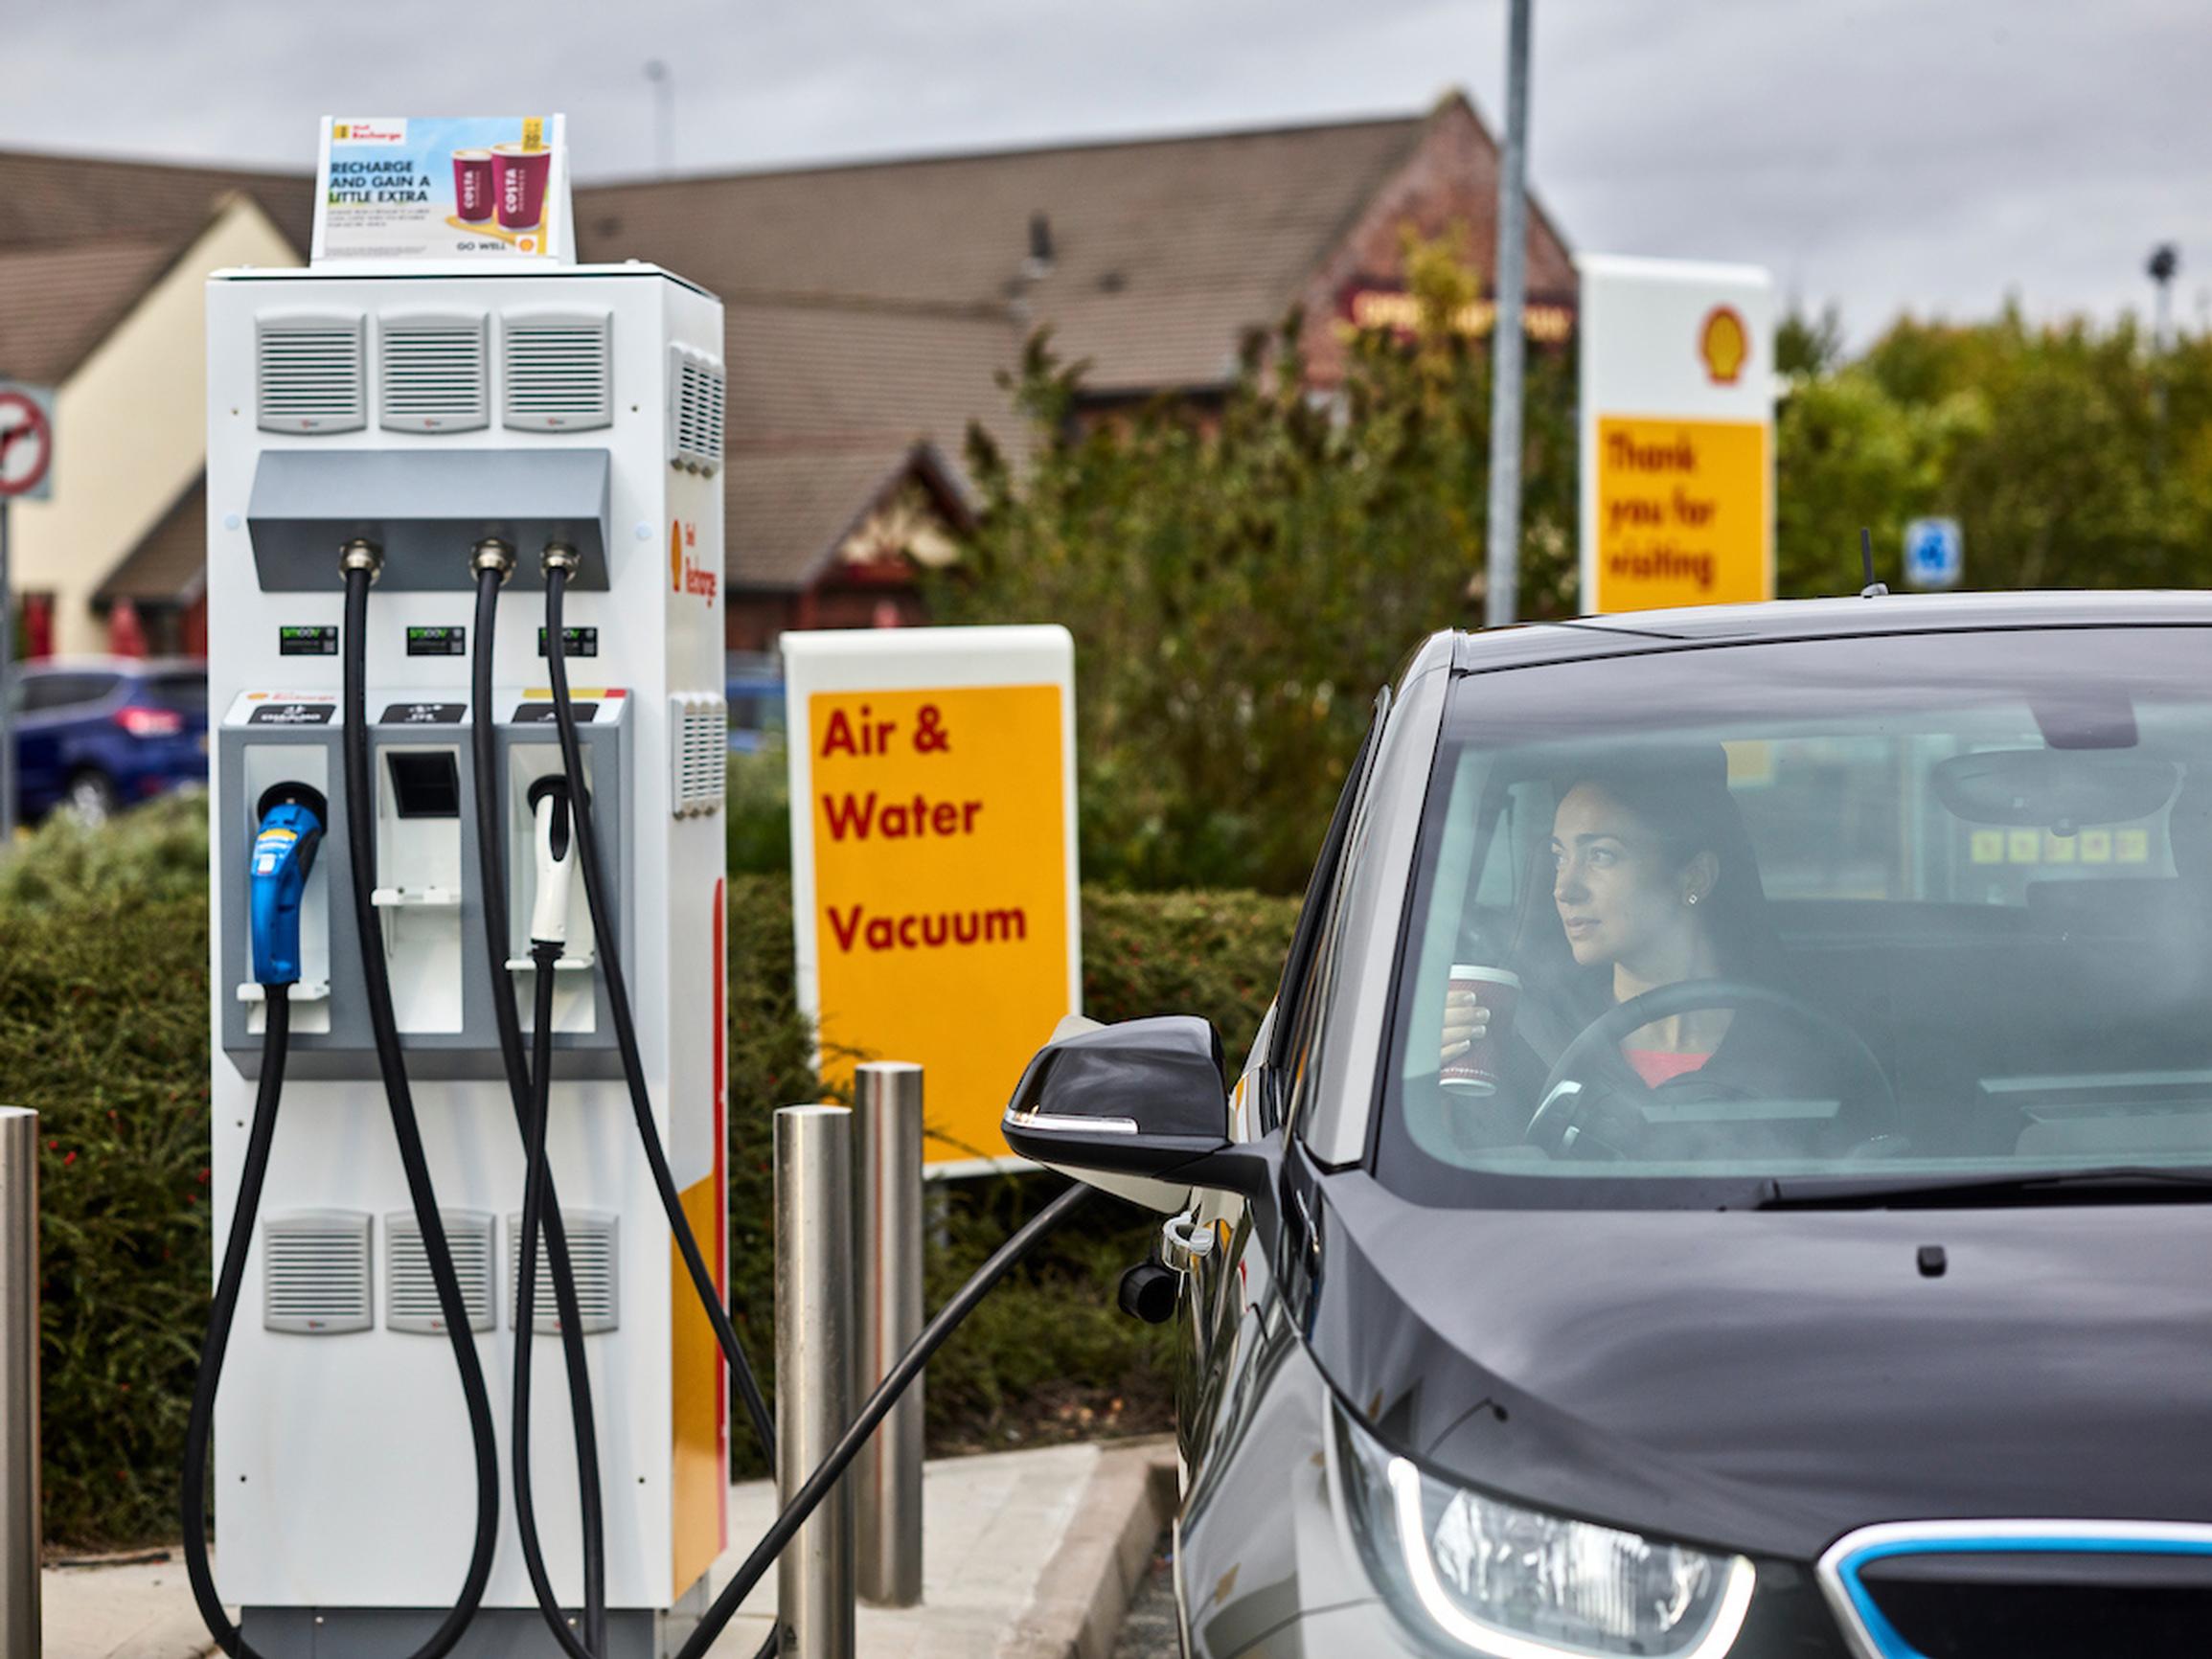 The chargers will initially be available on 10 Shell forecourts